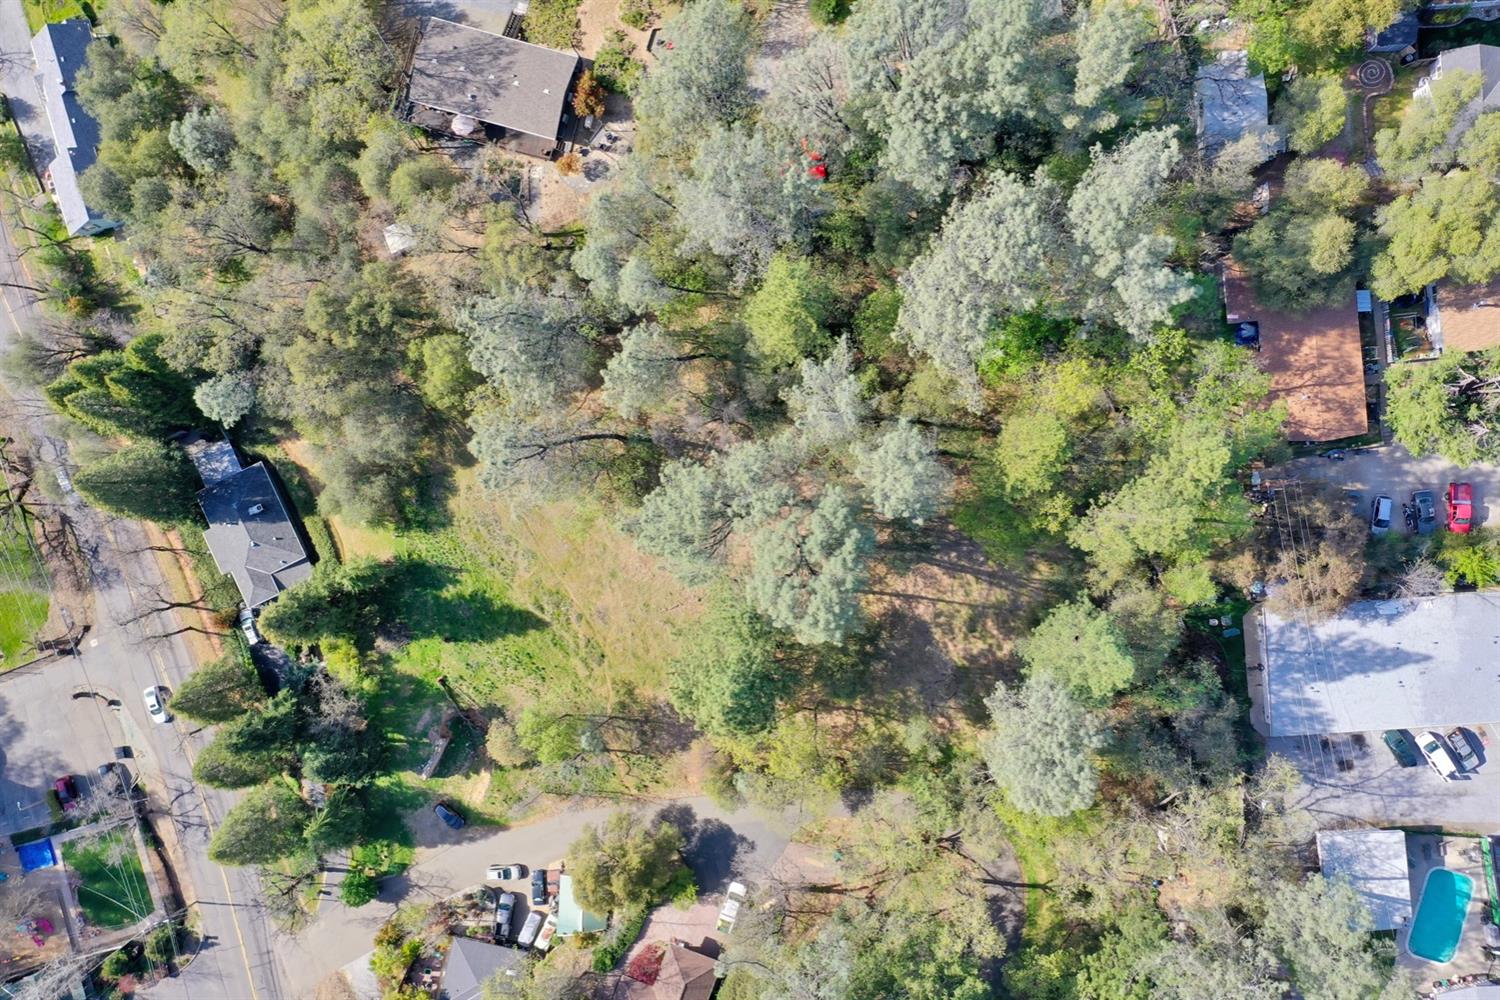 Sweet 1 plus acre lot in Placerville. Would be a great property to build your new home, water, sewer and power are at property. The lot runs all the way up the hill with Vivian Court on the south border. Great location, just walk downtown for shopping or great meals and just a quick drive to Highway 50.